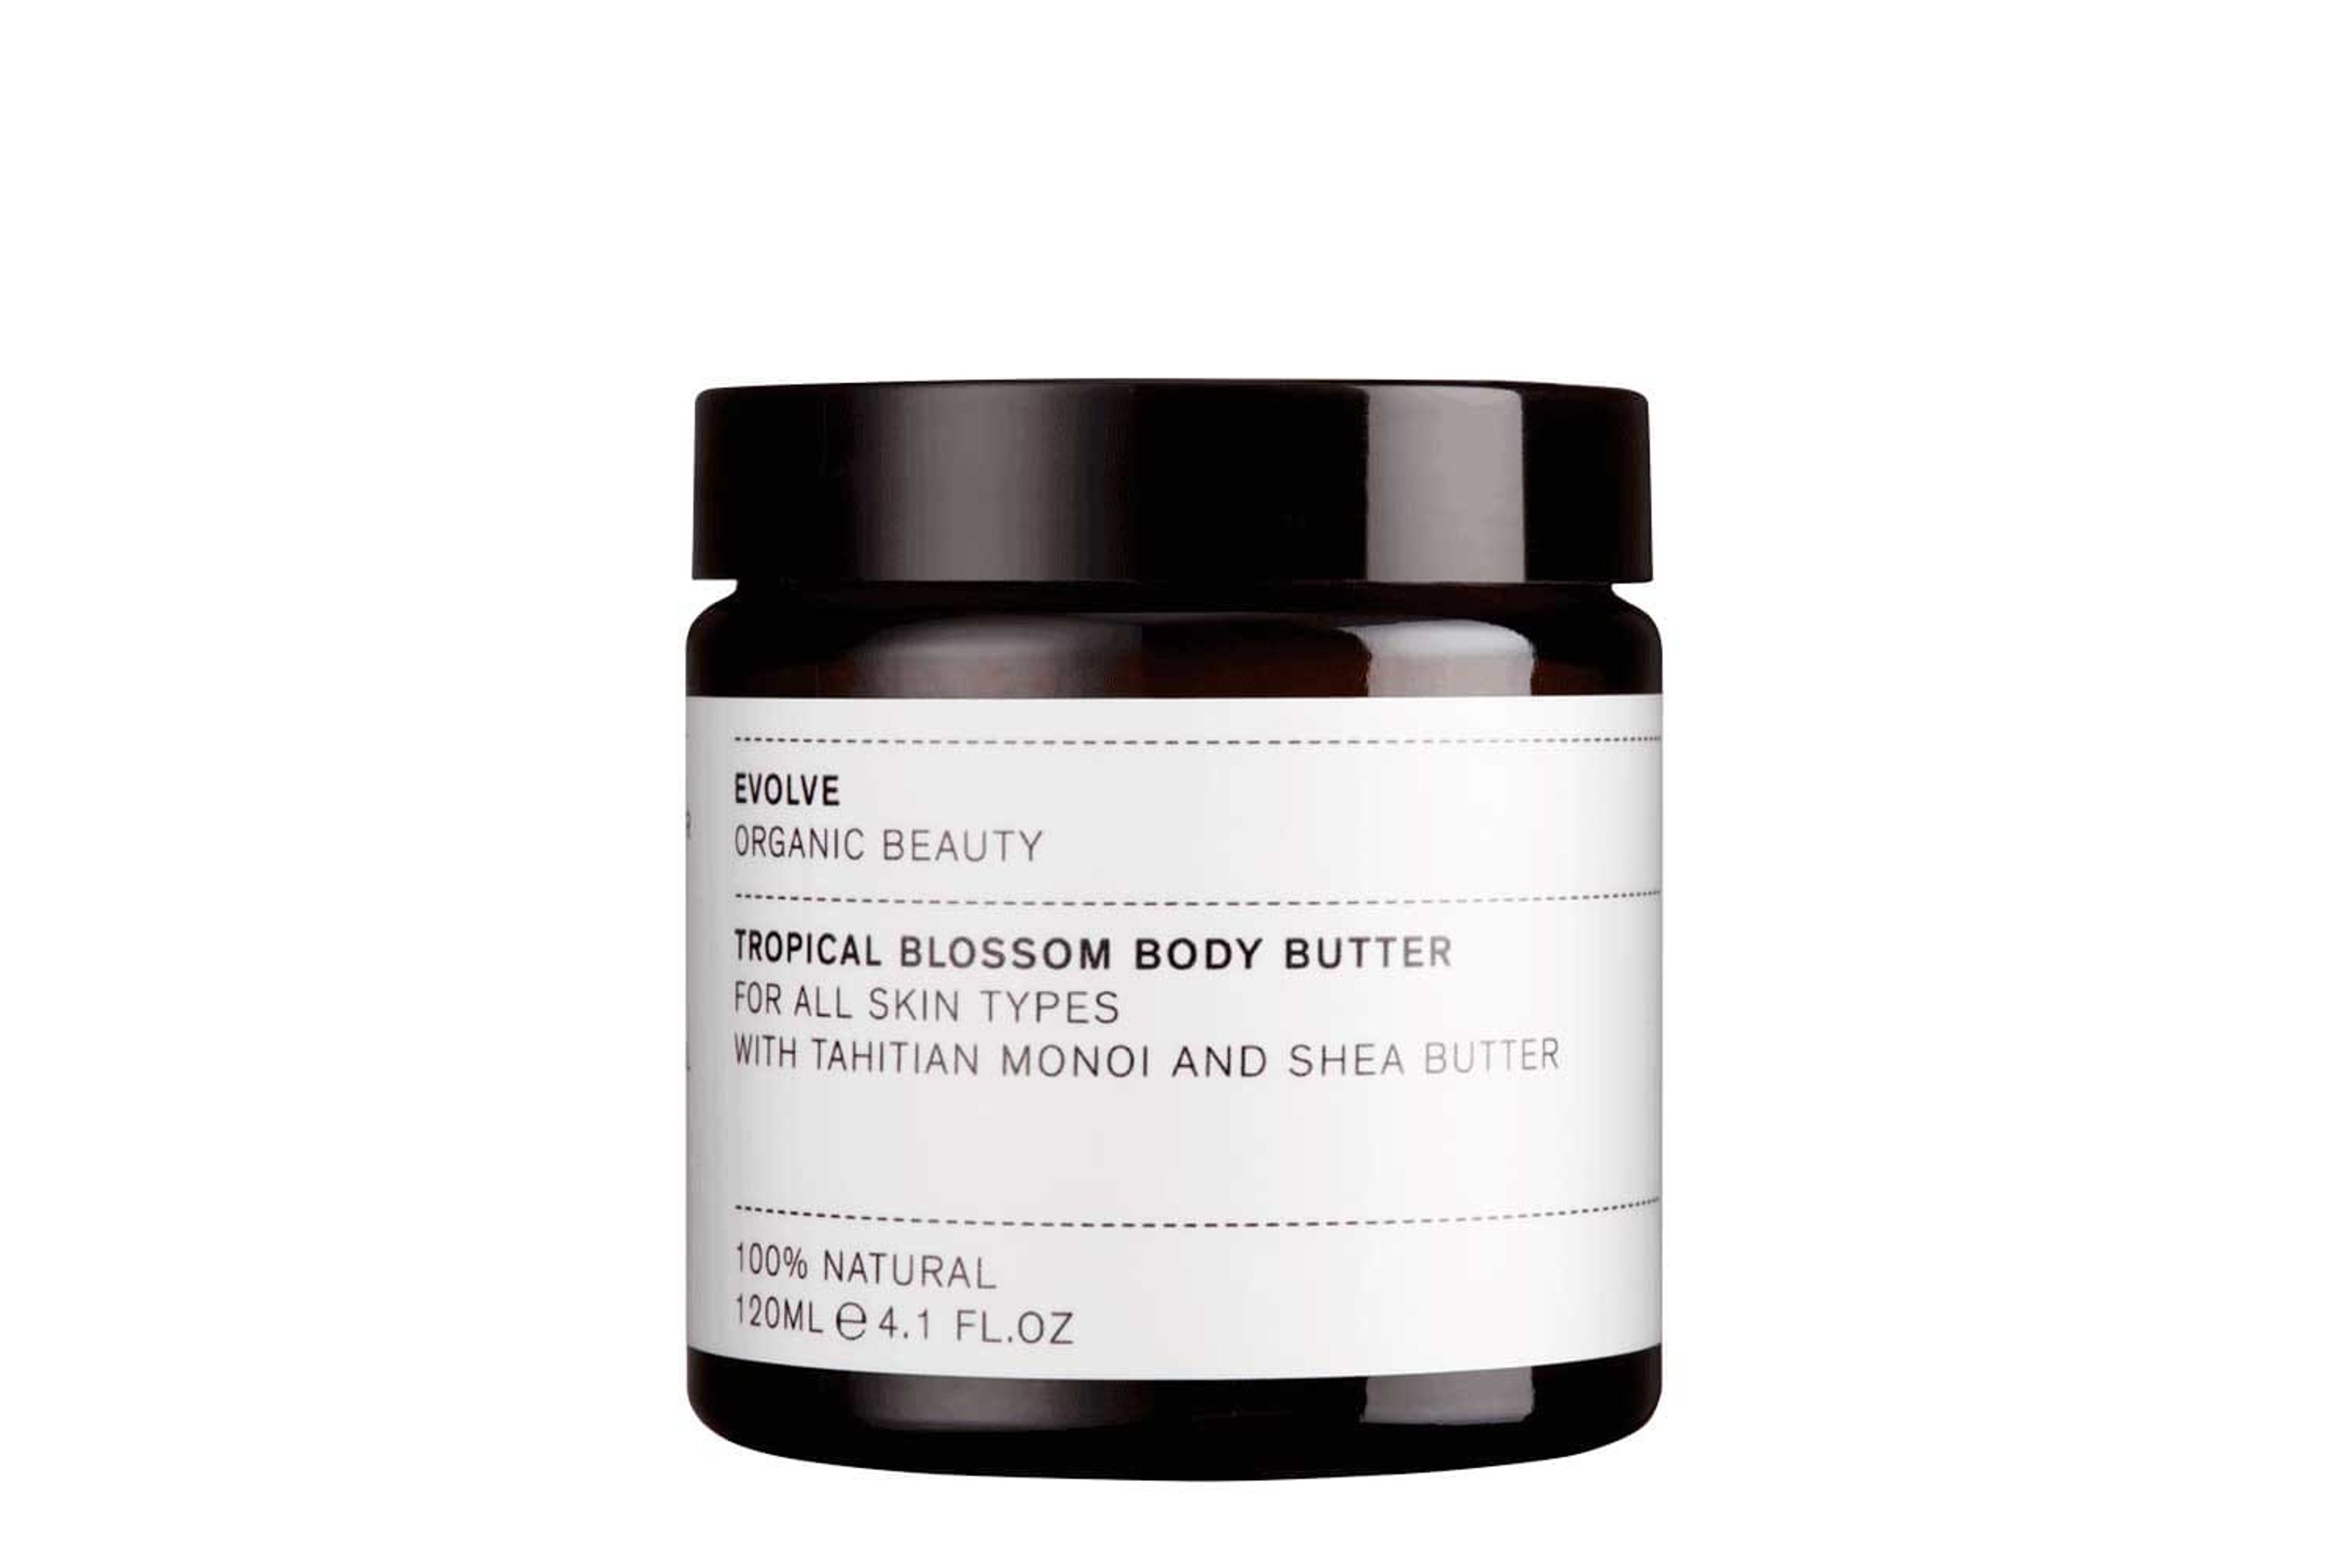 Tropical Blossom Organic Body Butter image 1 expanded